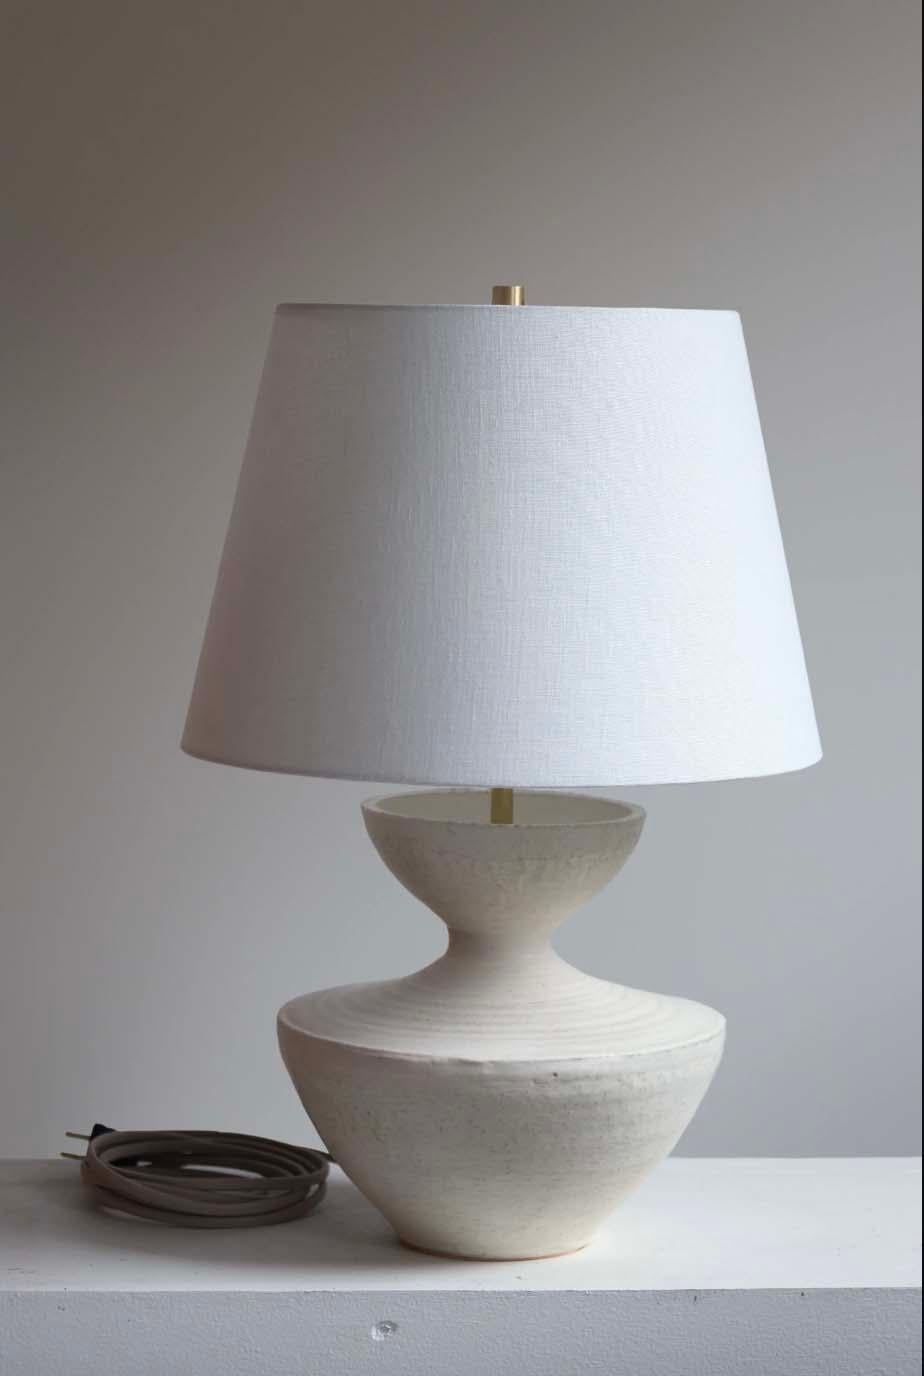 The Tauria lamp is handmade studio pottery by ceramic artist by Danny Kaplan. Shade included. Please note exact dimensions may vary.

Born in New York City and raised in Aix-en-Provence, France, Danny Kaplan’s passion for ceramics was shaped by